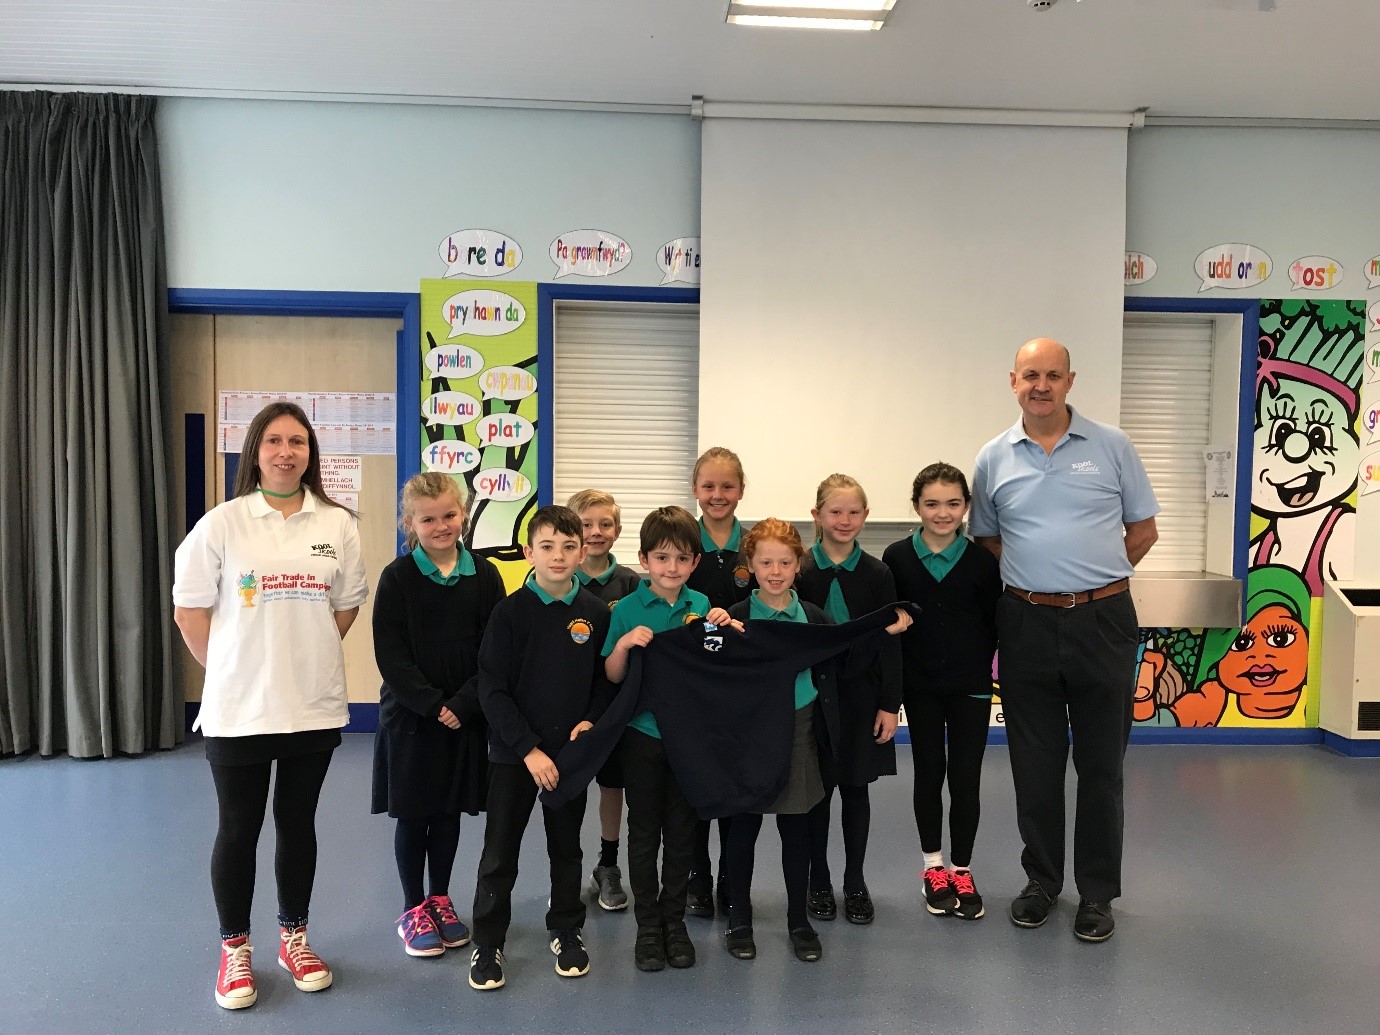 Cities, Counties and Towns that are Embracing Fairtrade School Uniform: 5 – Pembrokeshire and Carmarthenshire, South West Wales